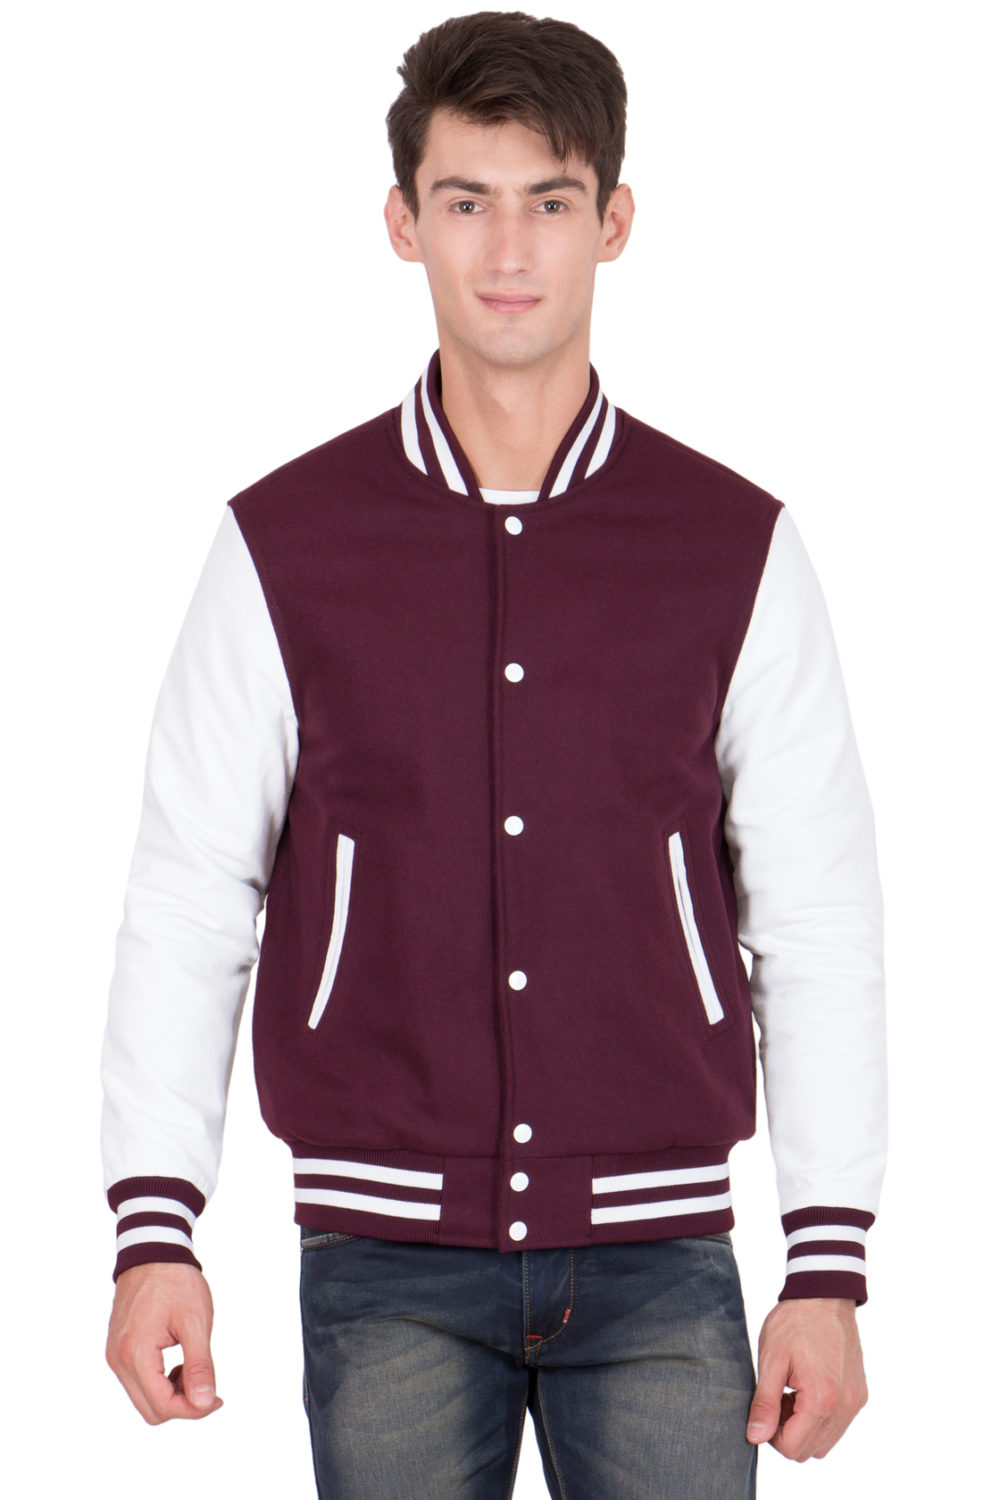 Letterman Jackets For Women | Special Offer up to 10% Discounts for ...